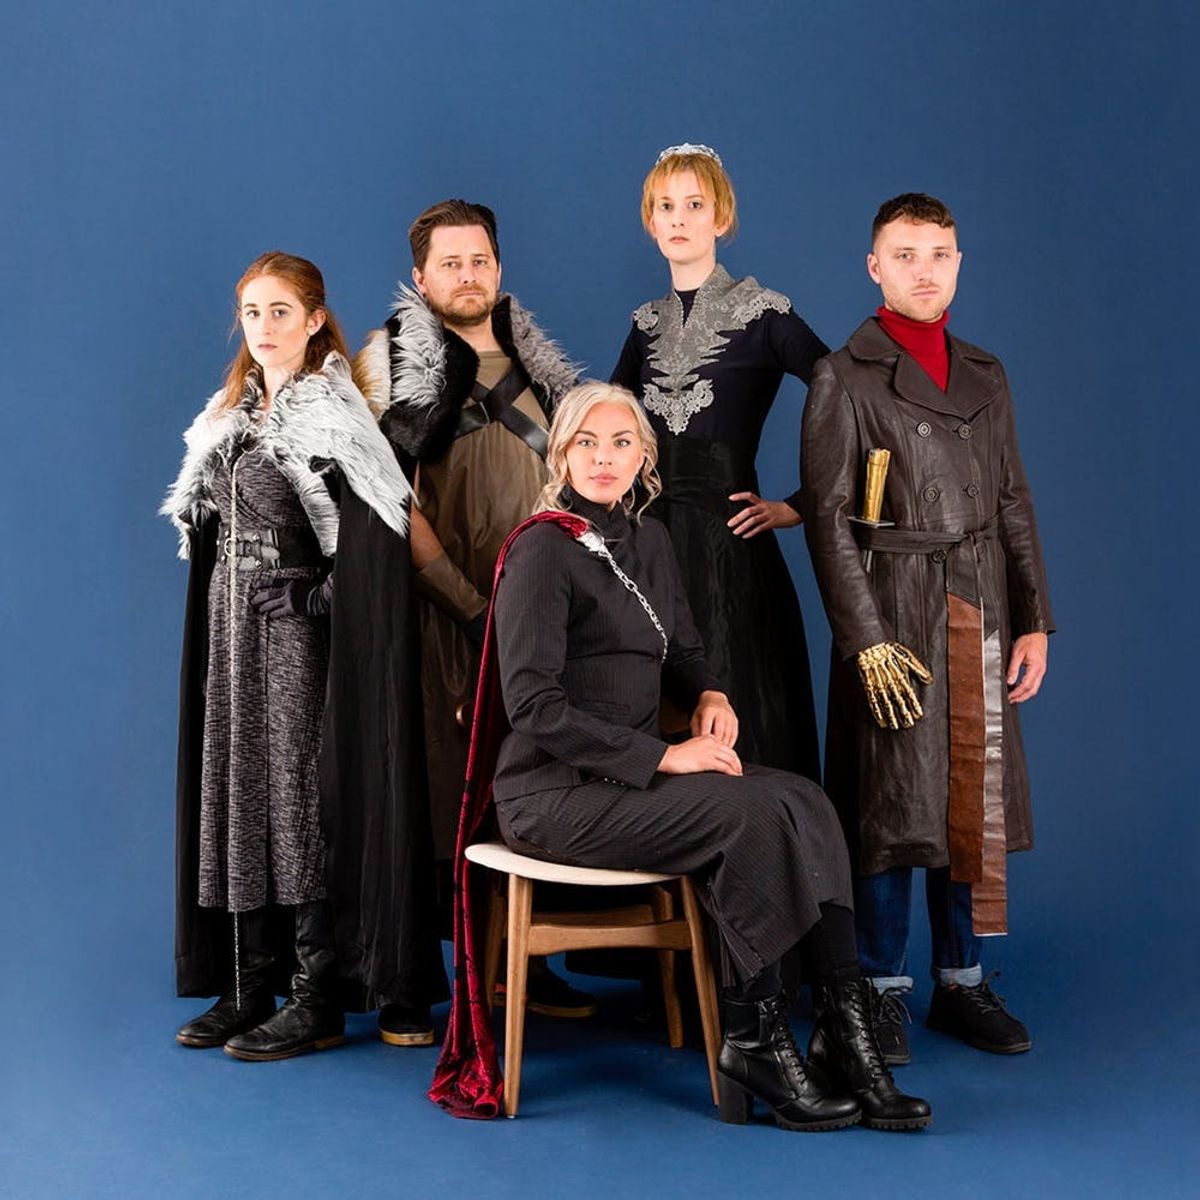 Prepare for Winter With This Game of Thrones Group Costume